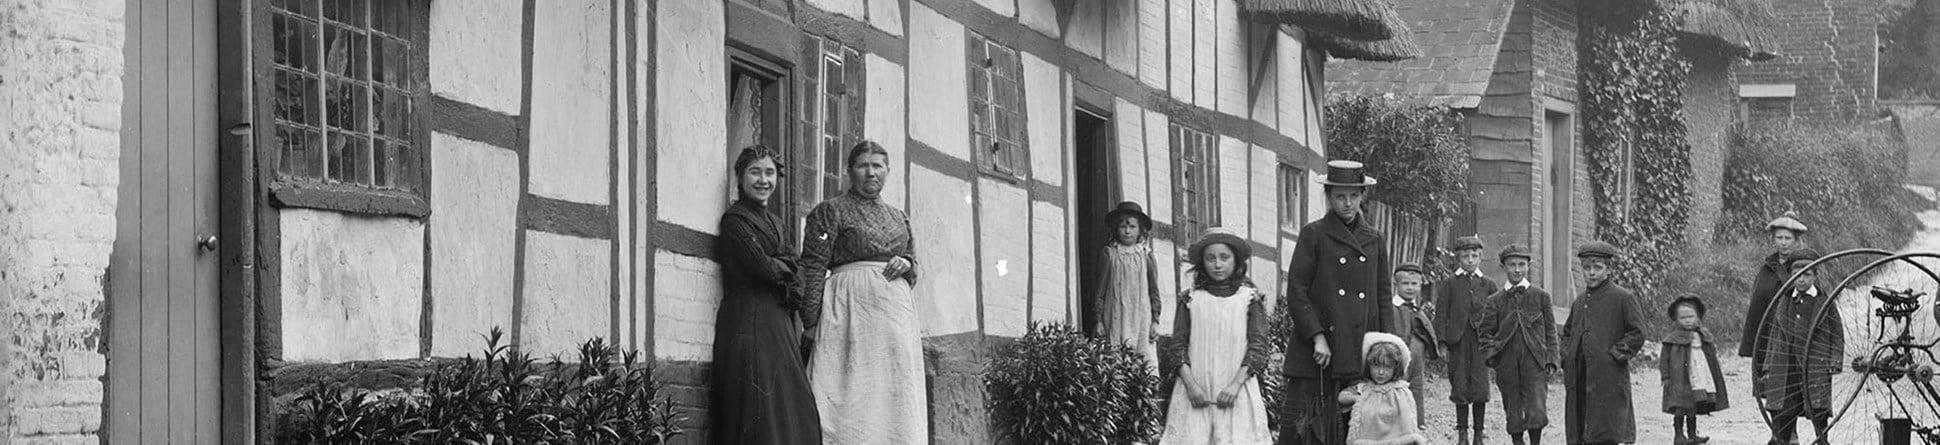 Exterior view of women and children posing outside a thatched cottage